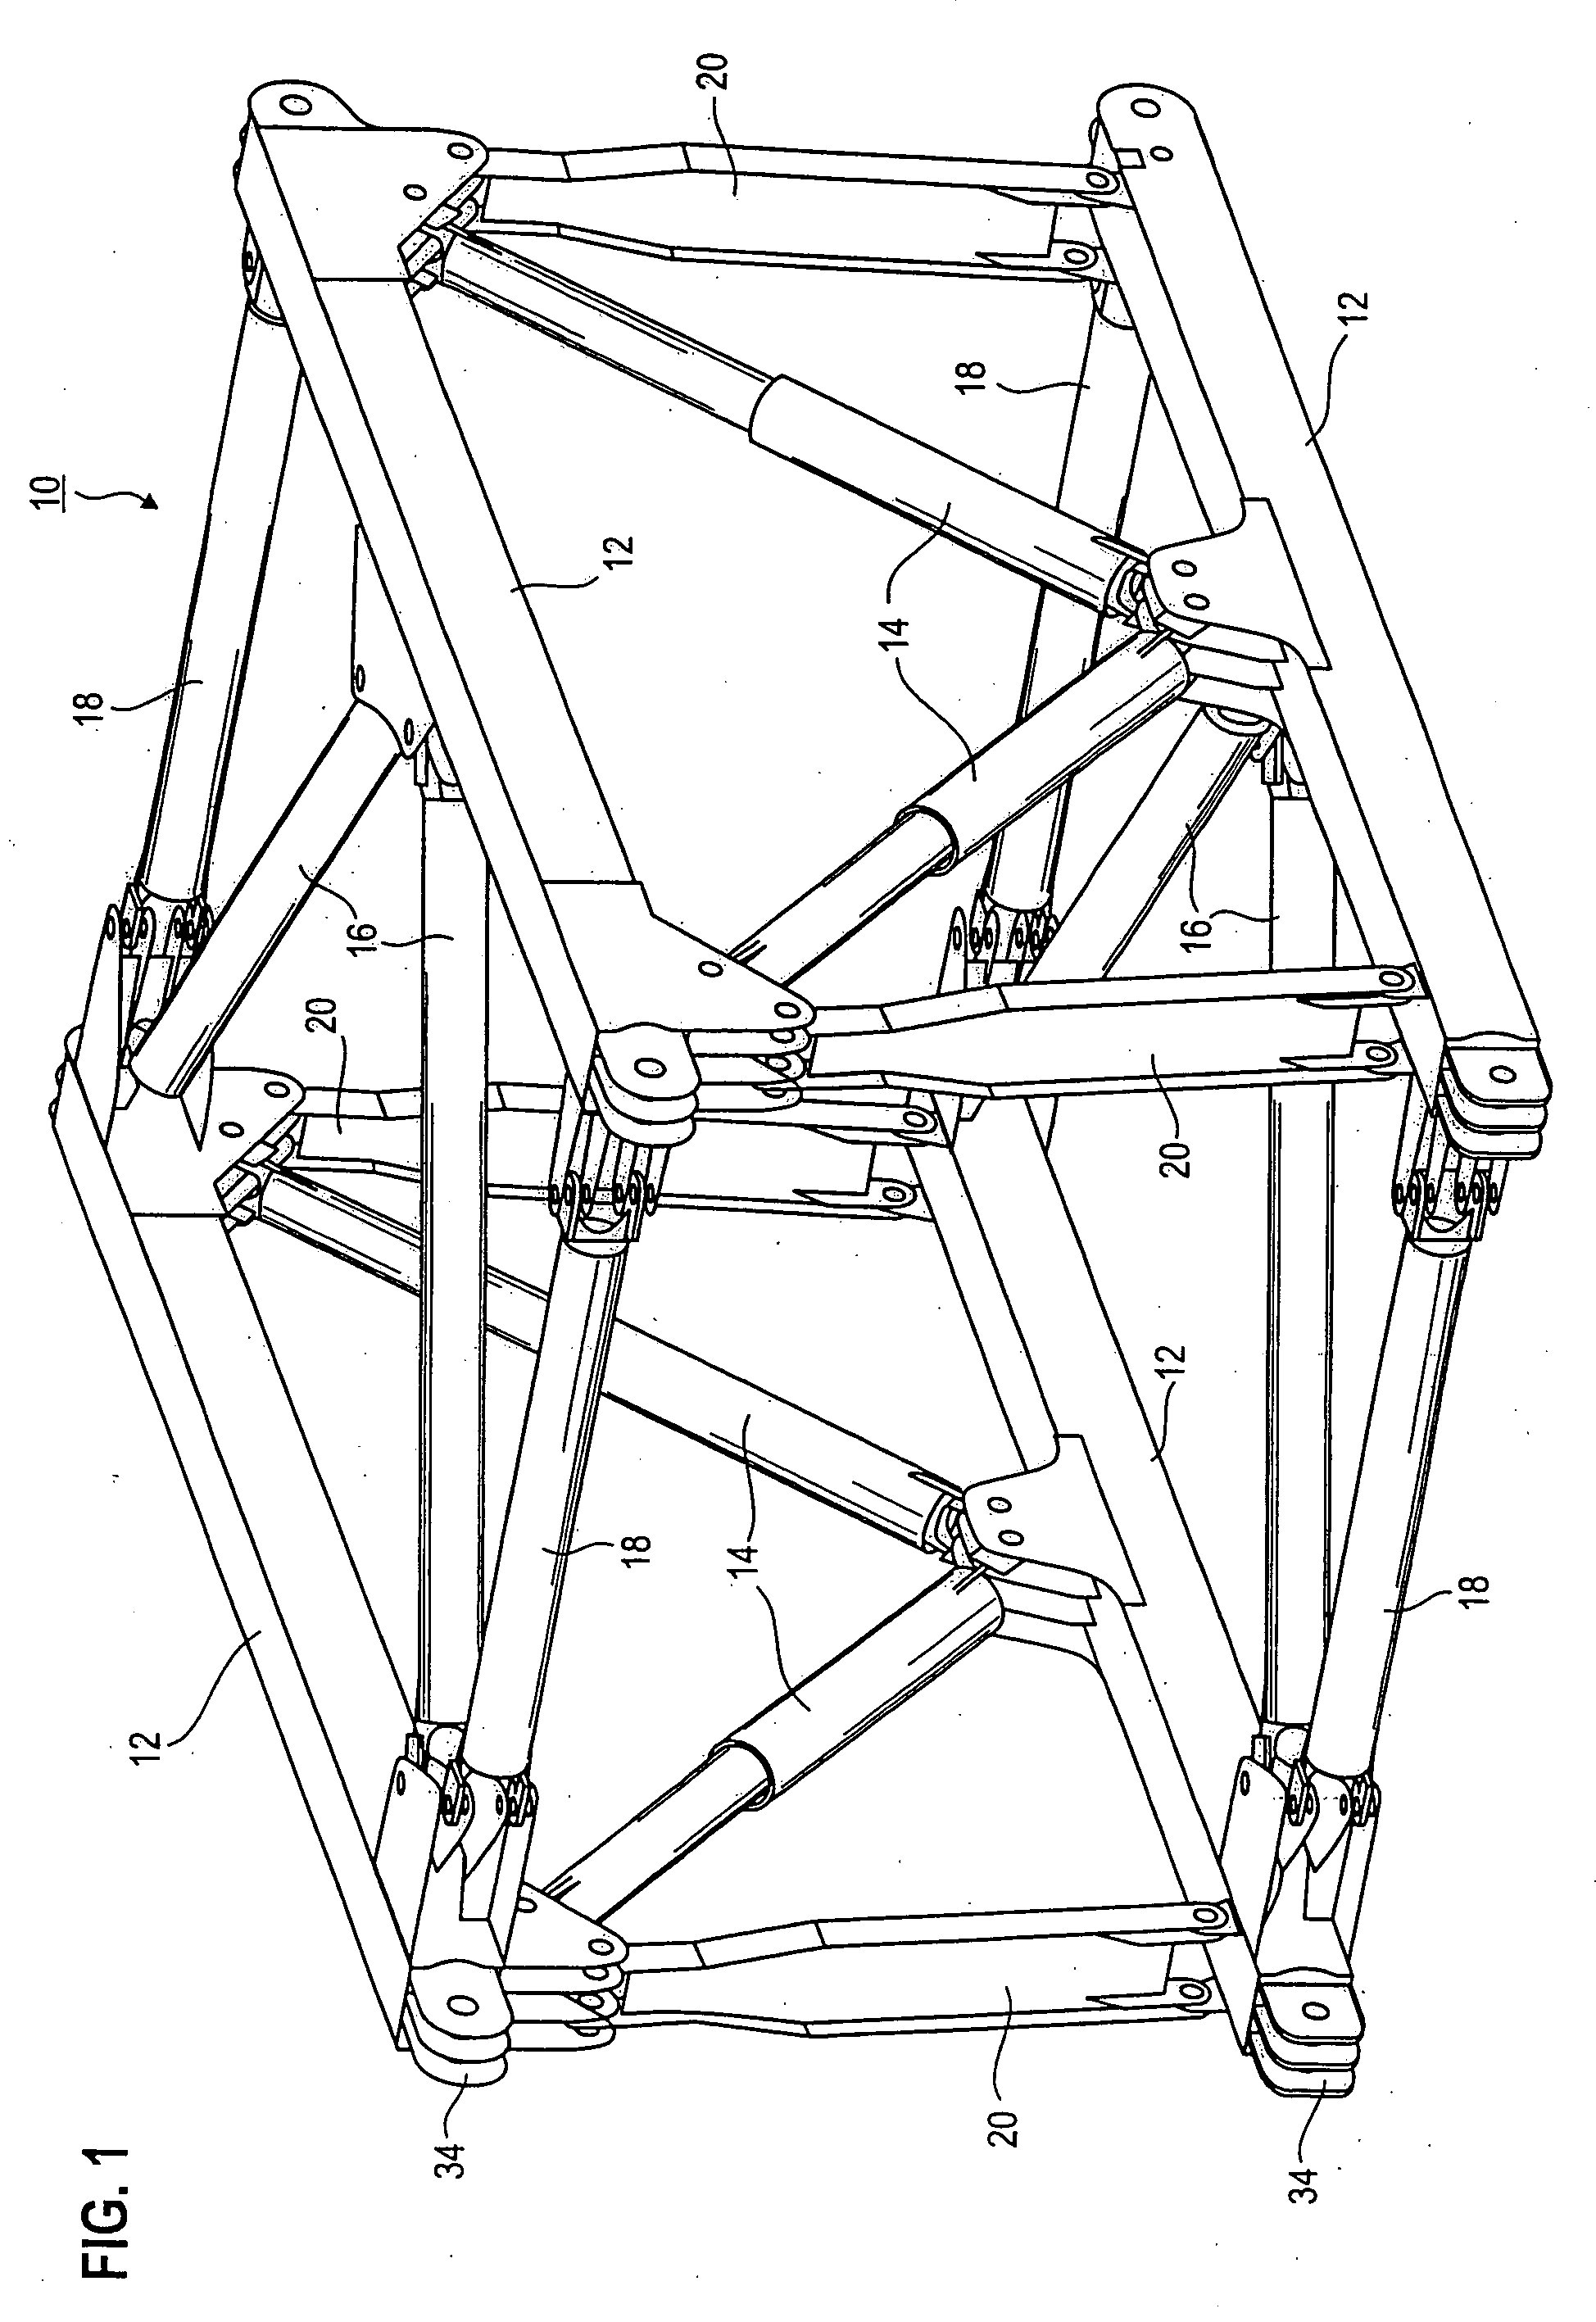 Lattice piece for a large mobile crane and method of erecting the same